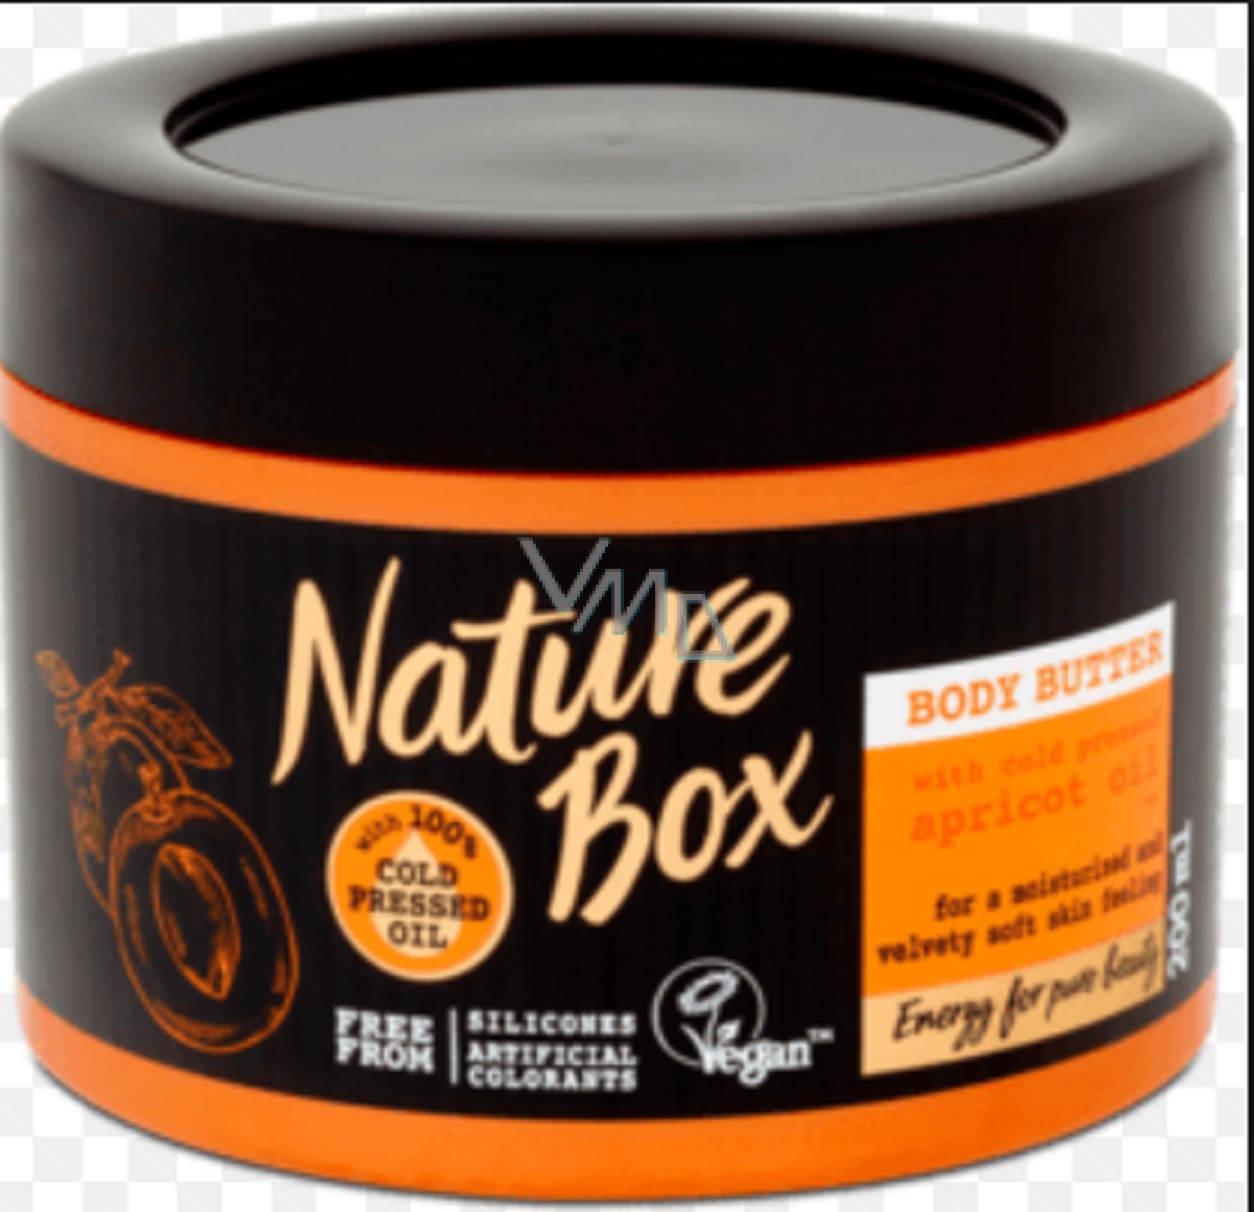 Natural box. Шварцкопф скраб баночка.